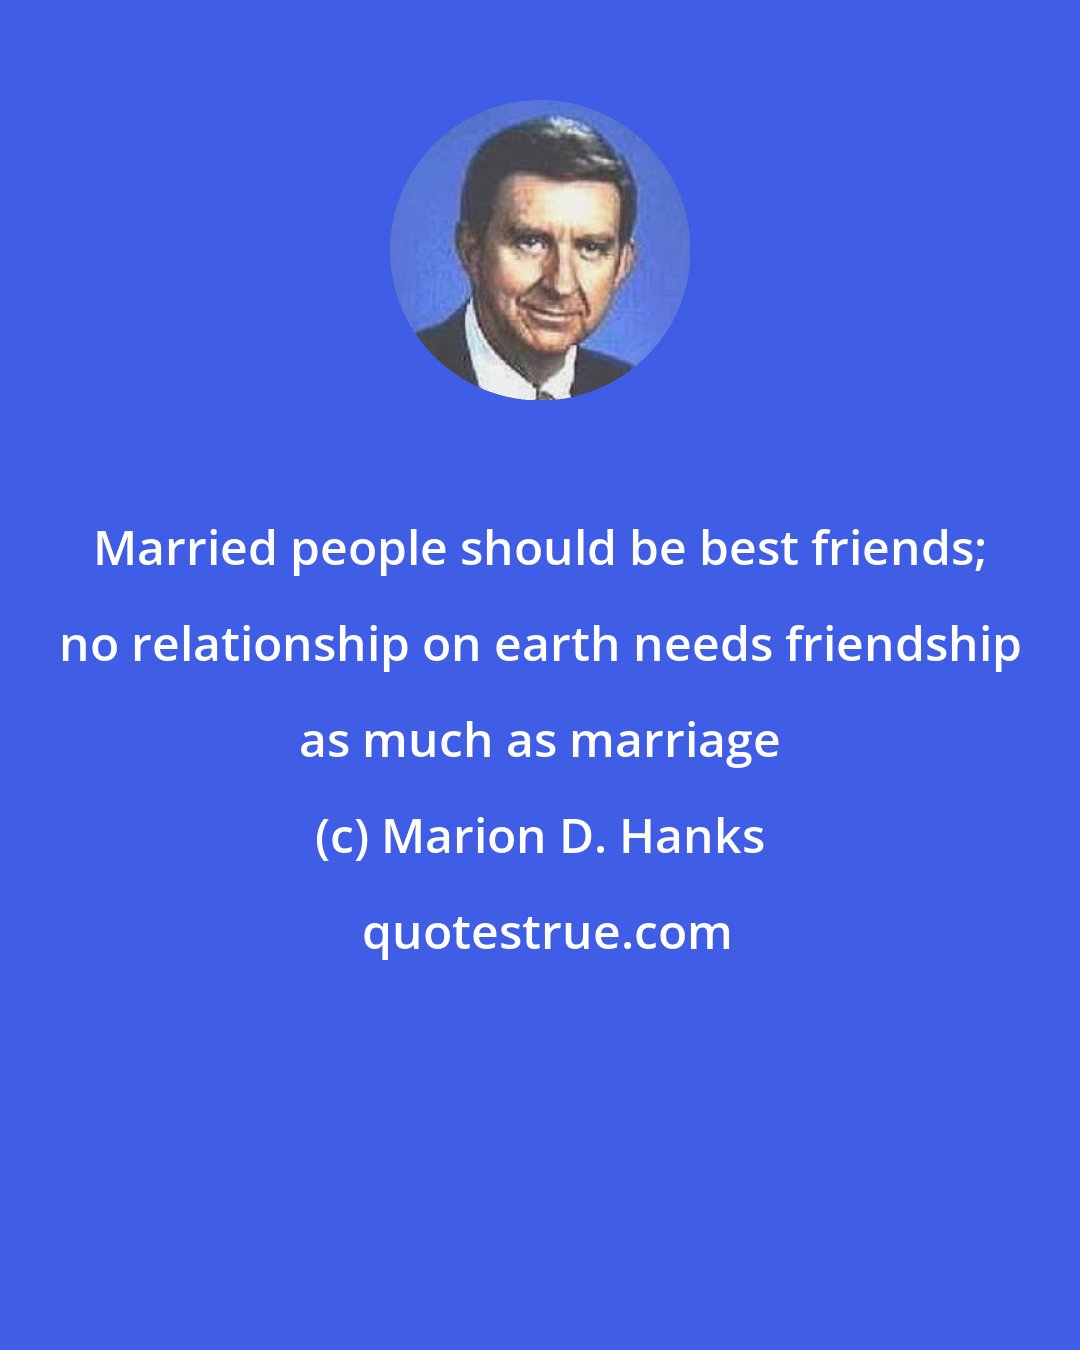 Marion D. Hanks: Married people should be best friends; no relationship on earth needs friendship as much as marriage